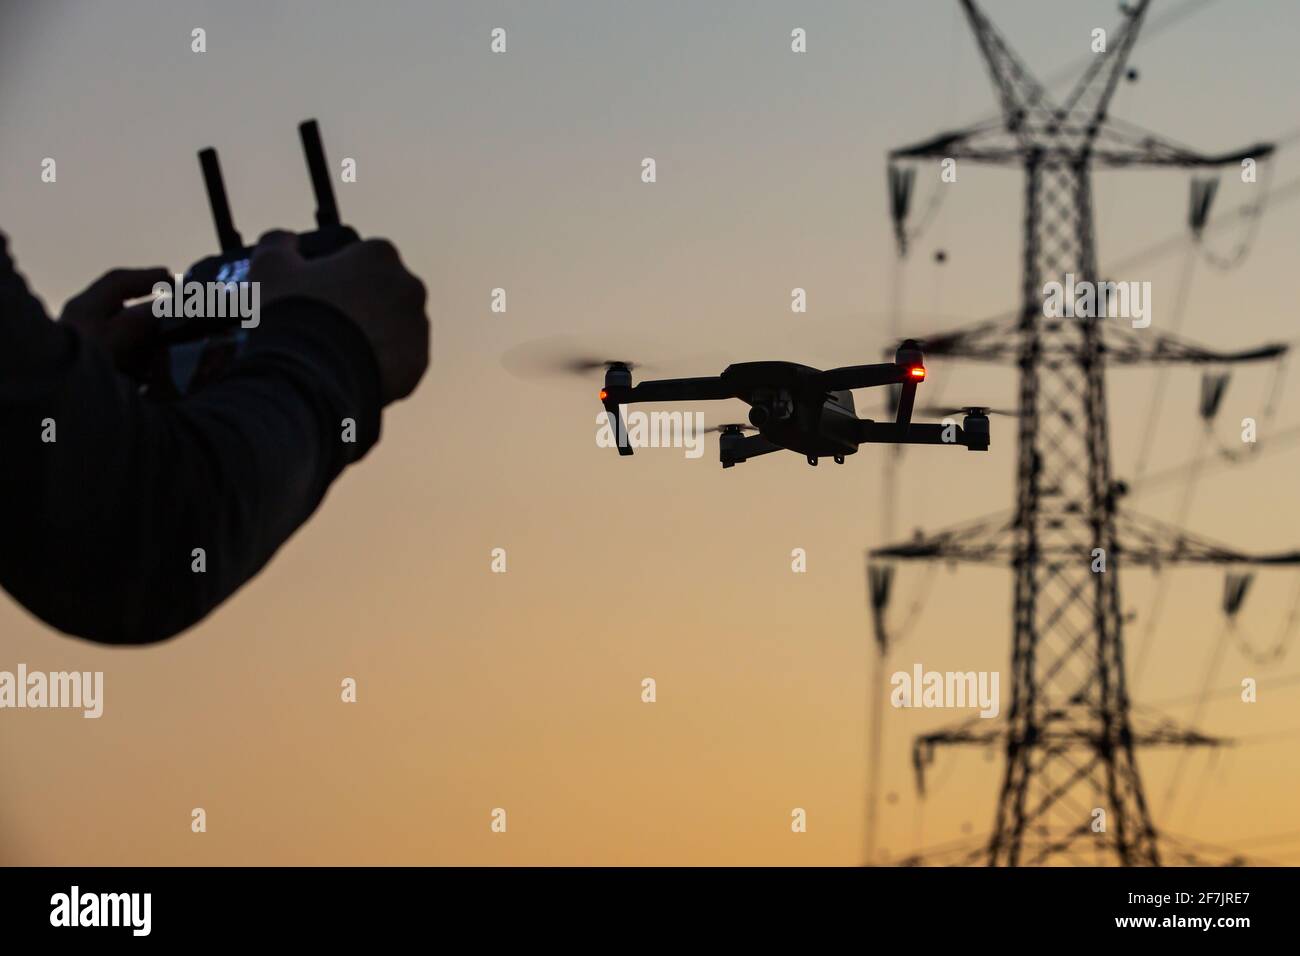 A concept of a man flying a drone collecting a data remotely from a power tower station or for telecommunication. Drone safety, power lines. Stock Photo